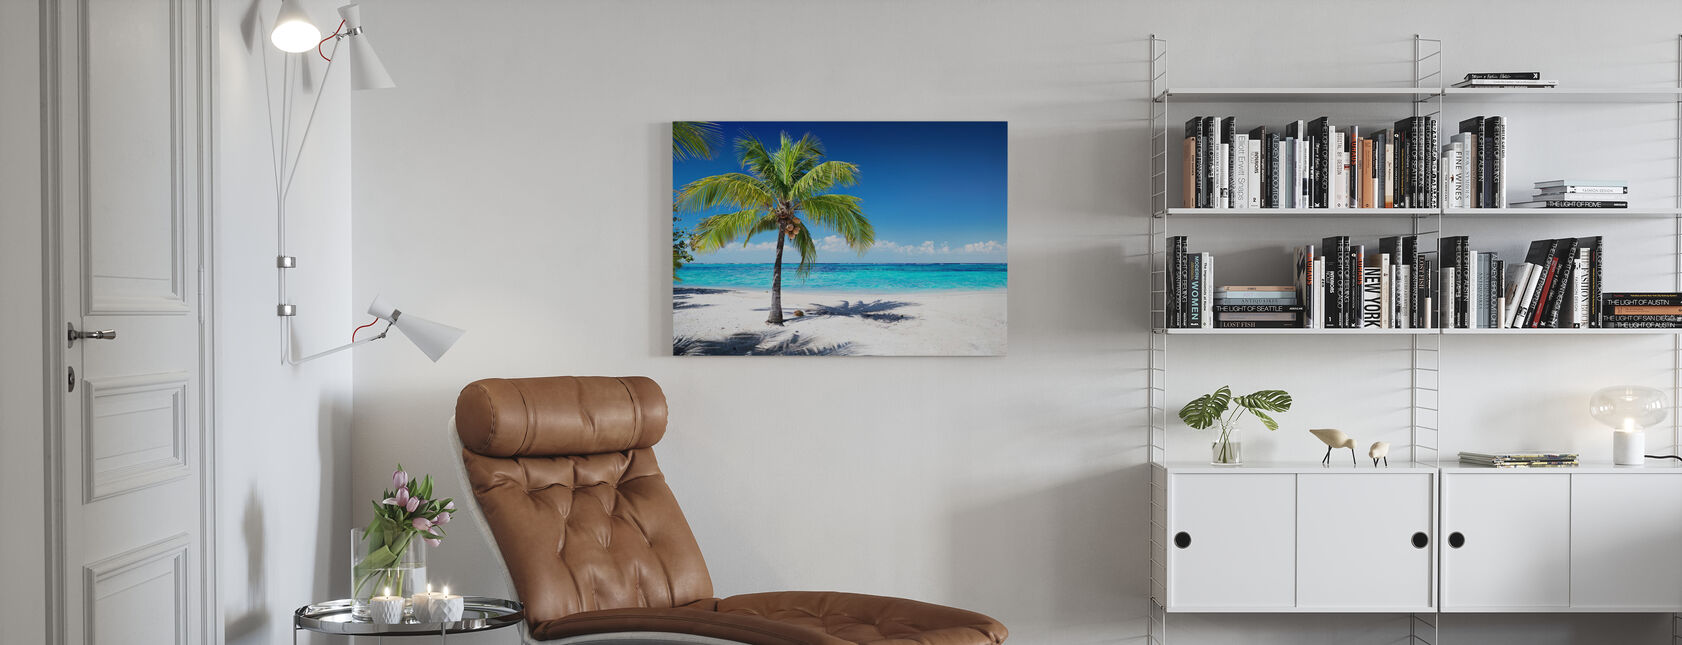 Coral Beach with Palm Tree - Canvas print - Living Room